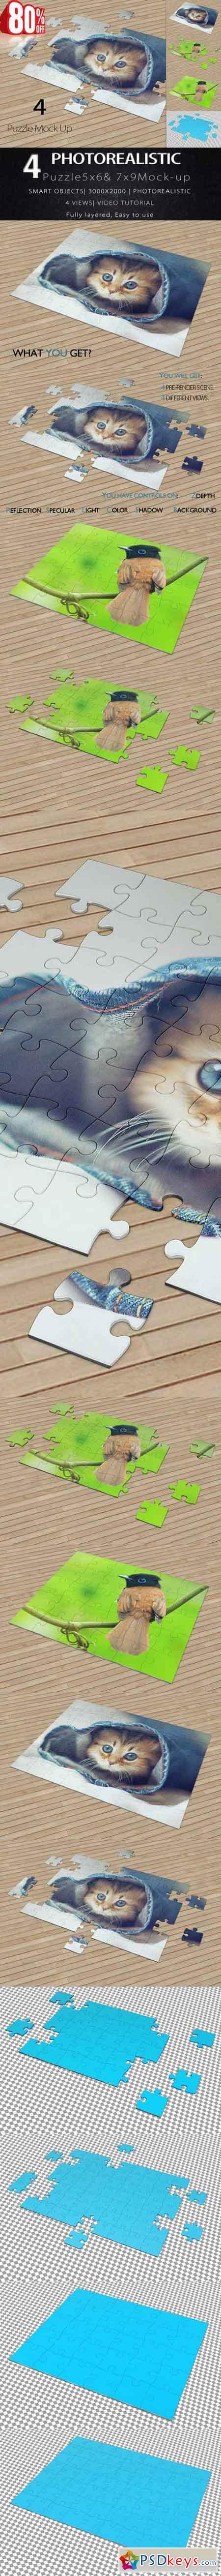 Download Puzzle Mock Up 651962 » Free Download Photoshop Vector ...